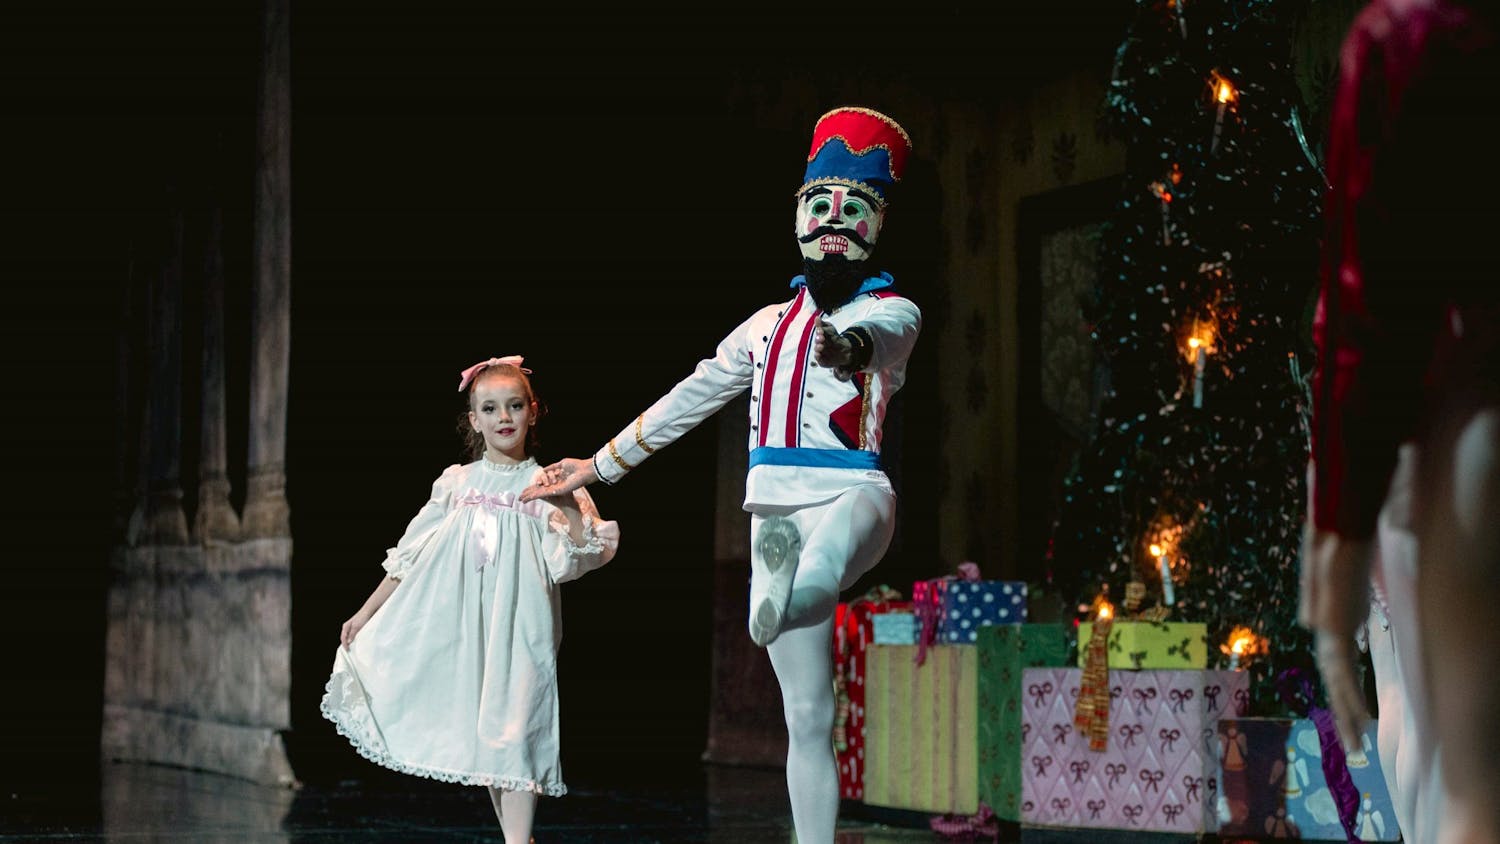 Ava Ramirez, who performs as Clara, and the Nutcracker share a dance in the traditional Christmas ballet.